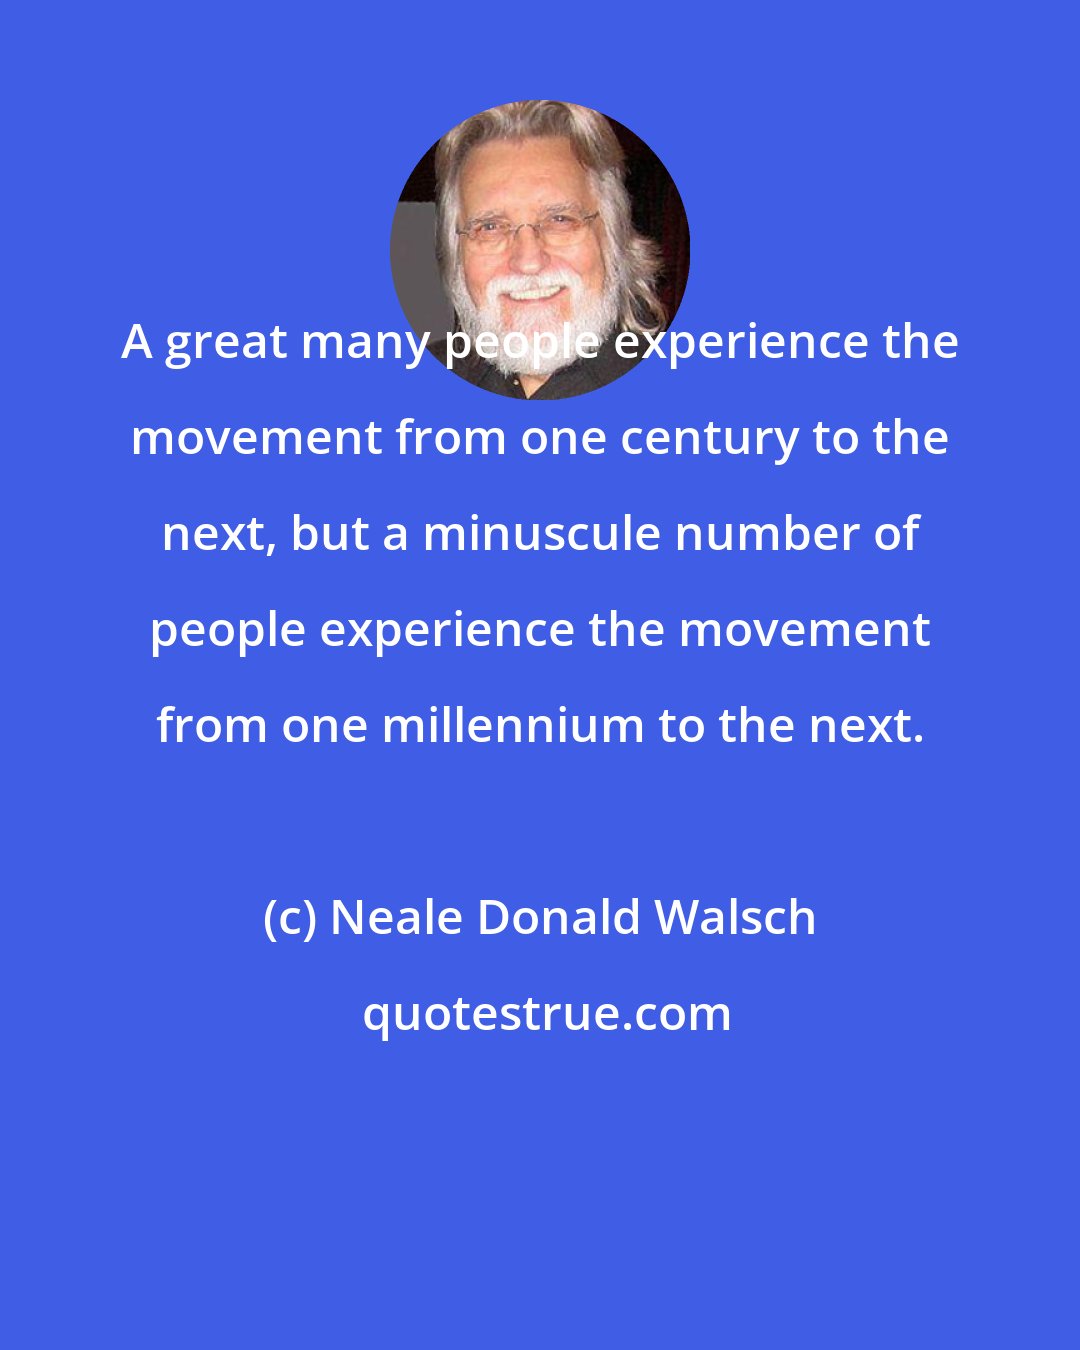 Neale Donald Walsch: A great many people experience the movement from one century to the next, but a minuscule number of people experience the movement from one millennium to the next.